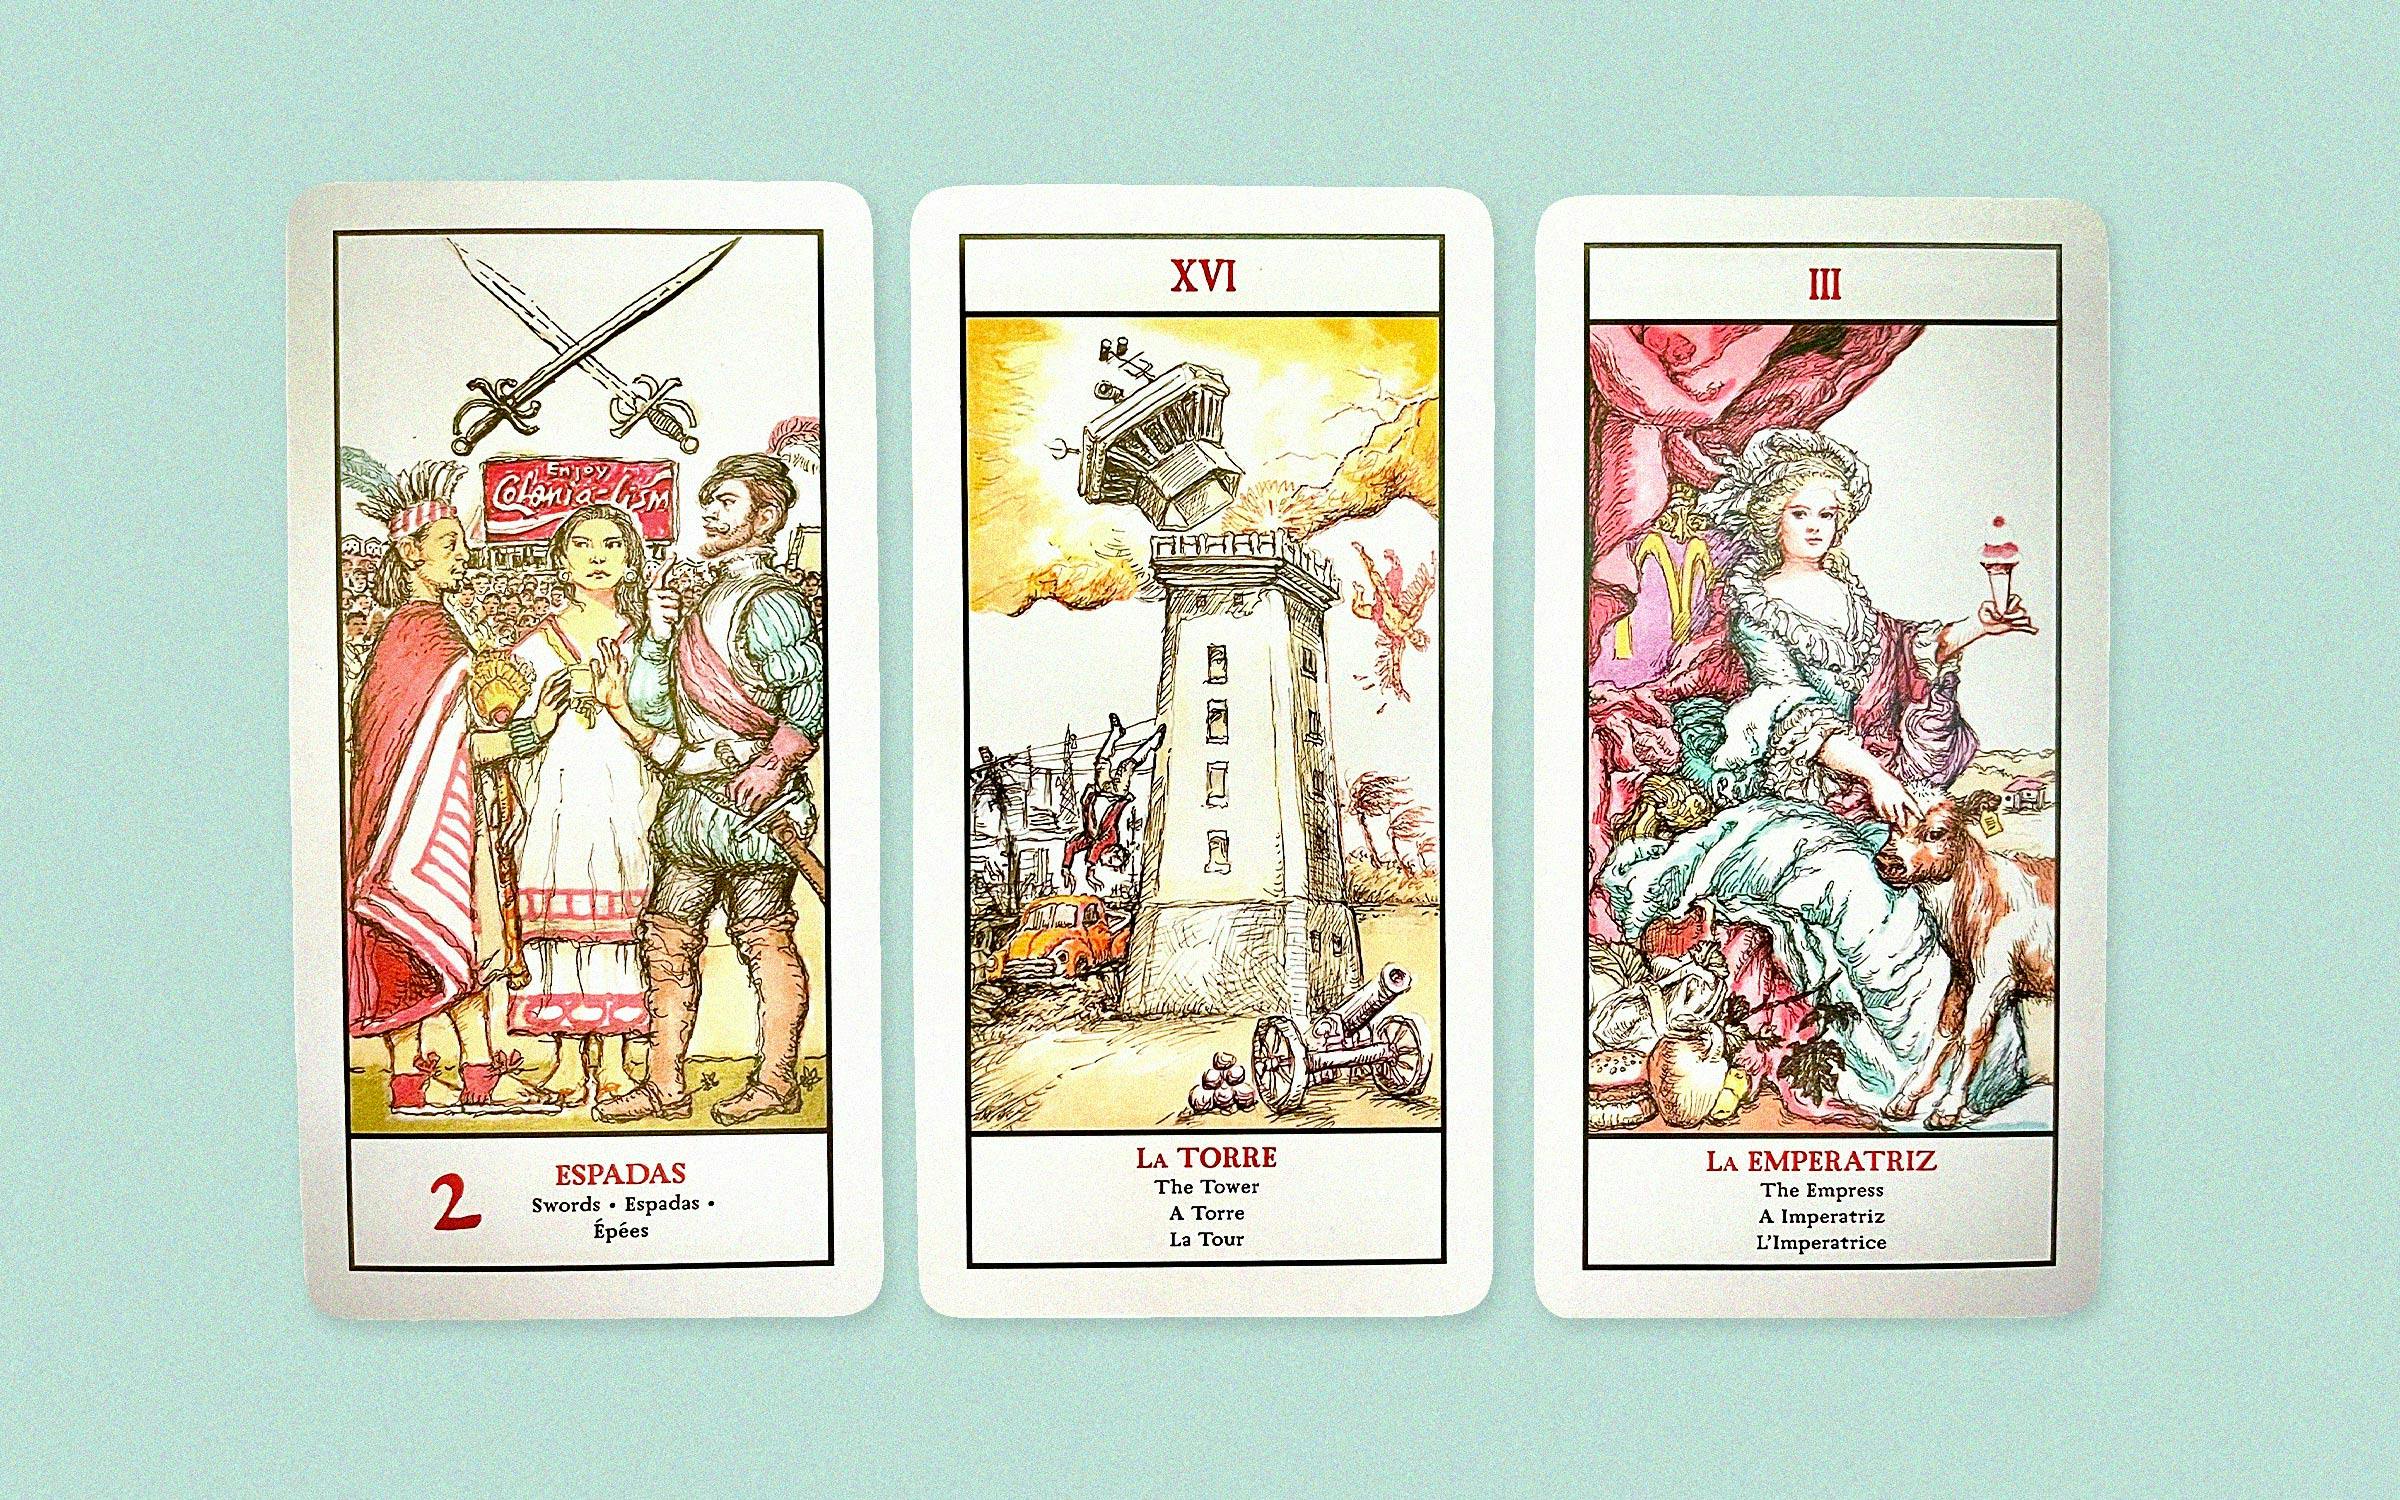 A Houston Artist Packs Justice, Humor, and Insight Into "Neocolonial" Tarot Deck